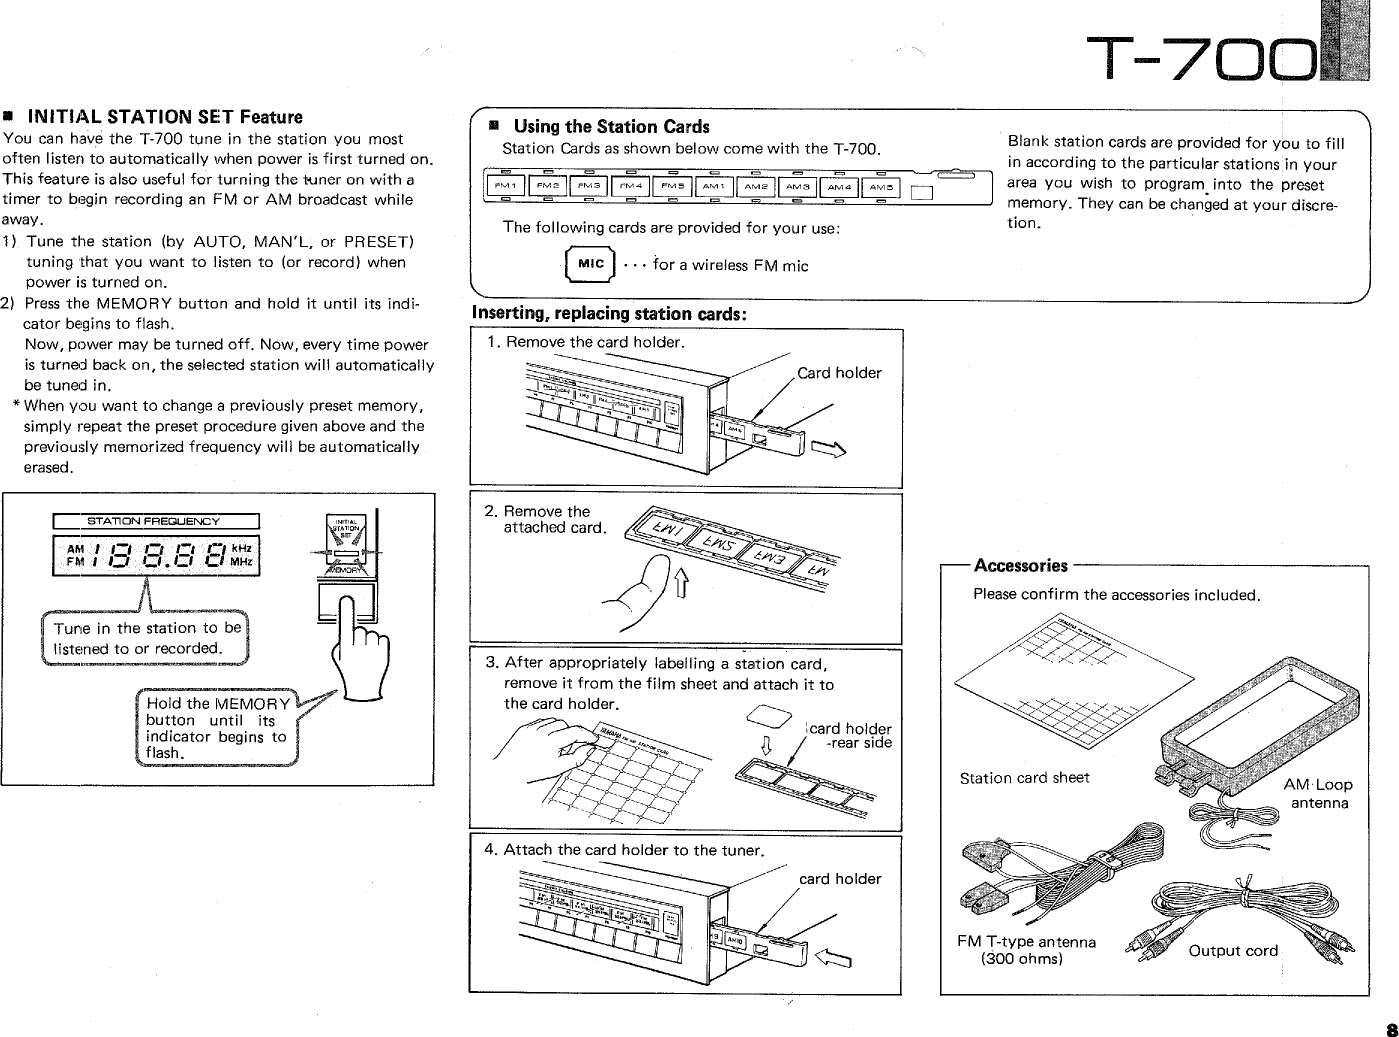 Page 9 of 12 - Yamaha .橡.ページ) T-700 OWNER'S MANUAL